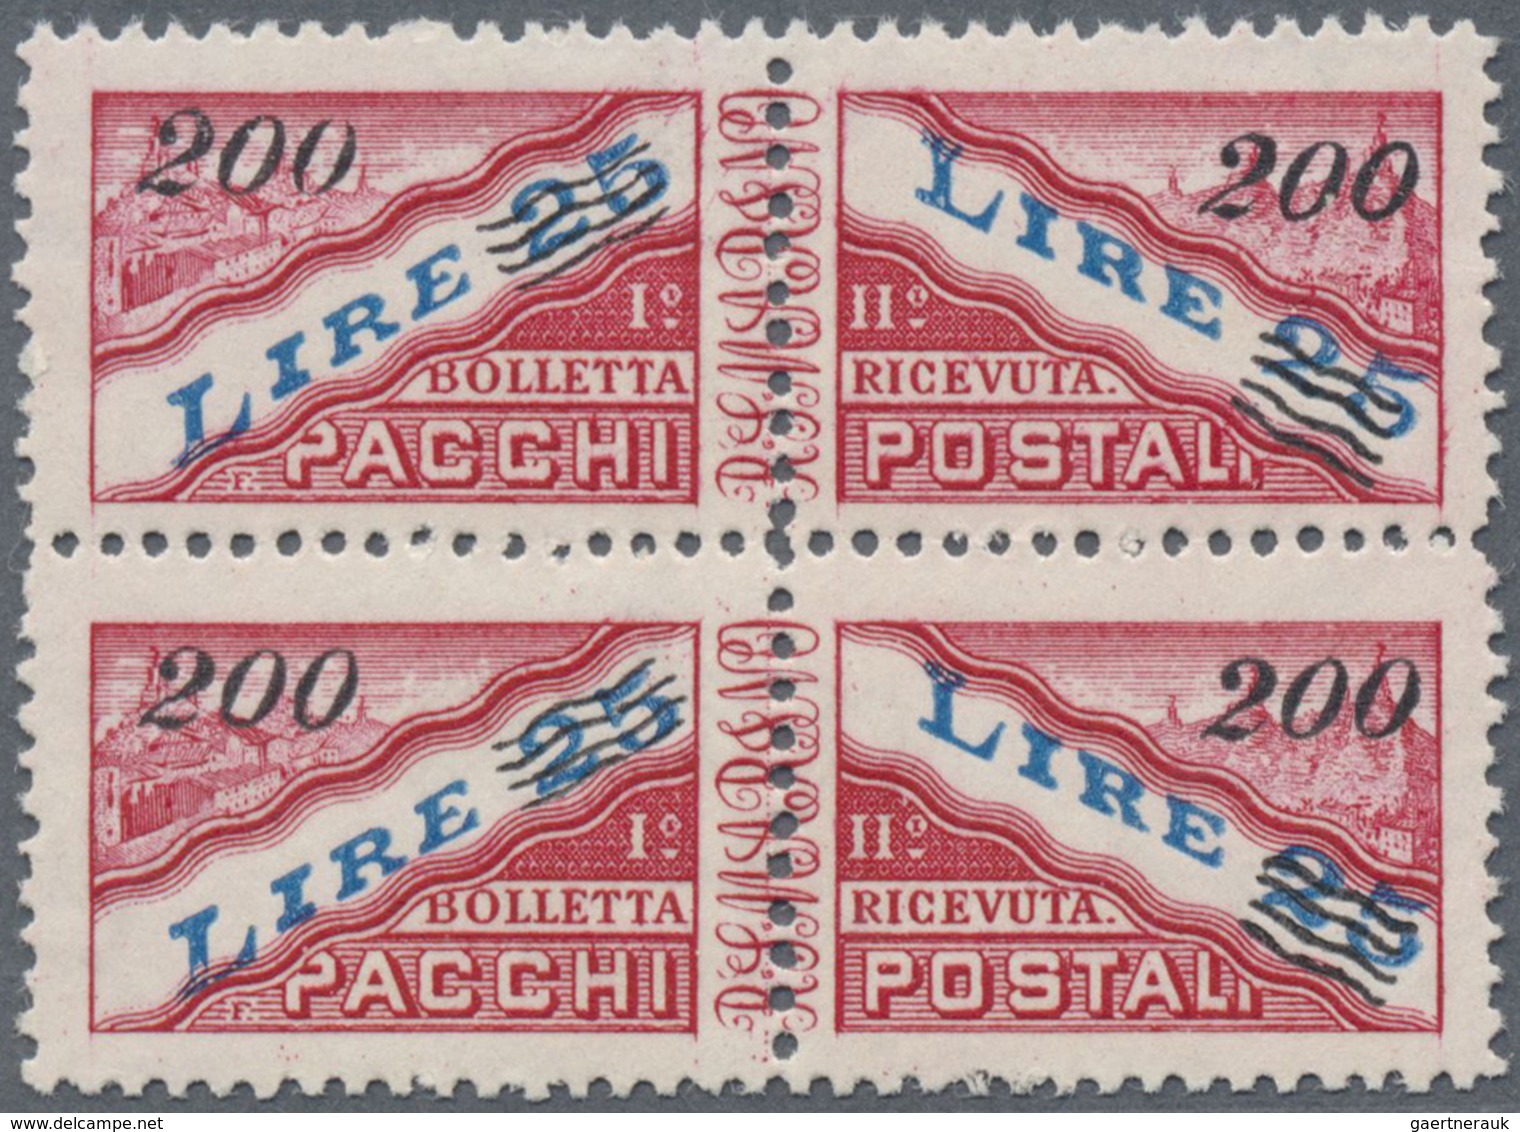 **/ San Marino - Paketmarken: 1950, Package Stamps With New Value Overprint 200 L On 25 L. In The Vertic - Parcel Post Stamps